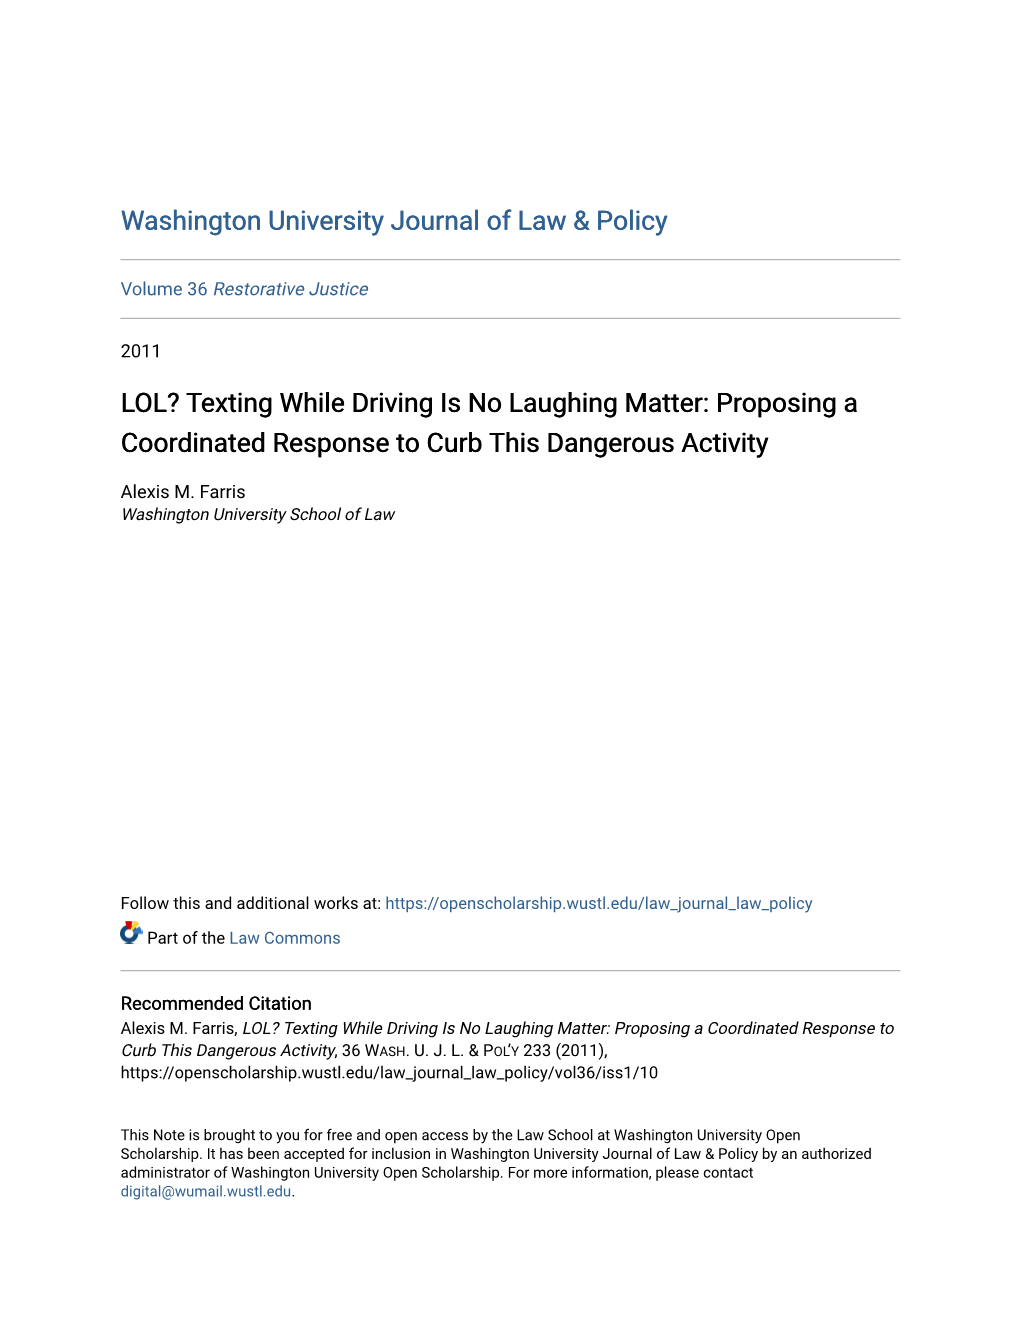 LOL? Texting While Driving Is No Laughing Matter: Proposing a Coordinated Response to Curb This Dangerous Activity